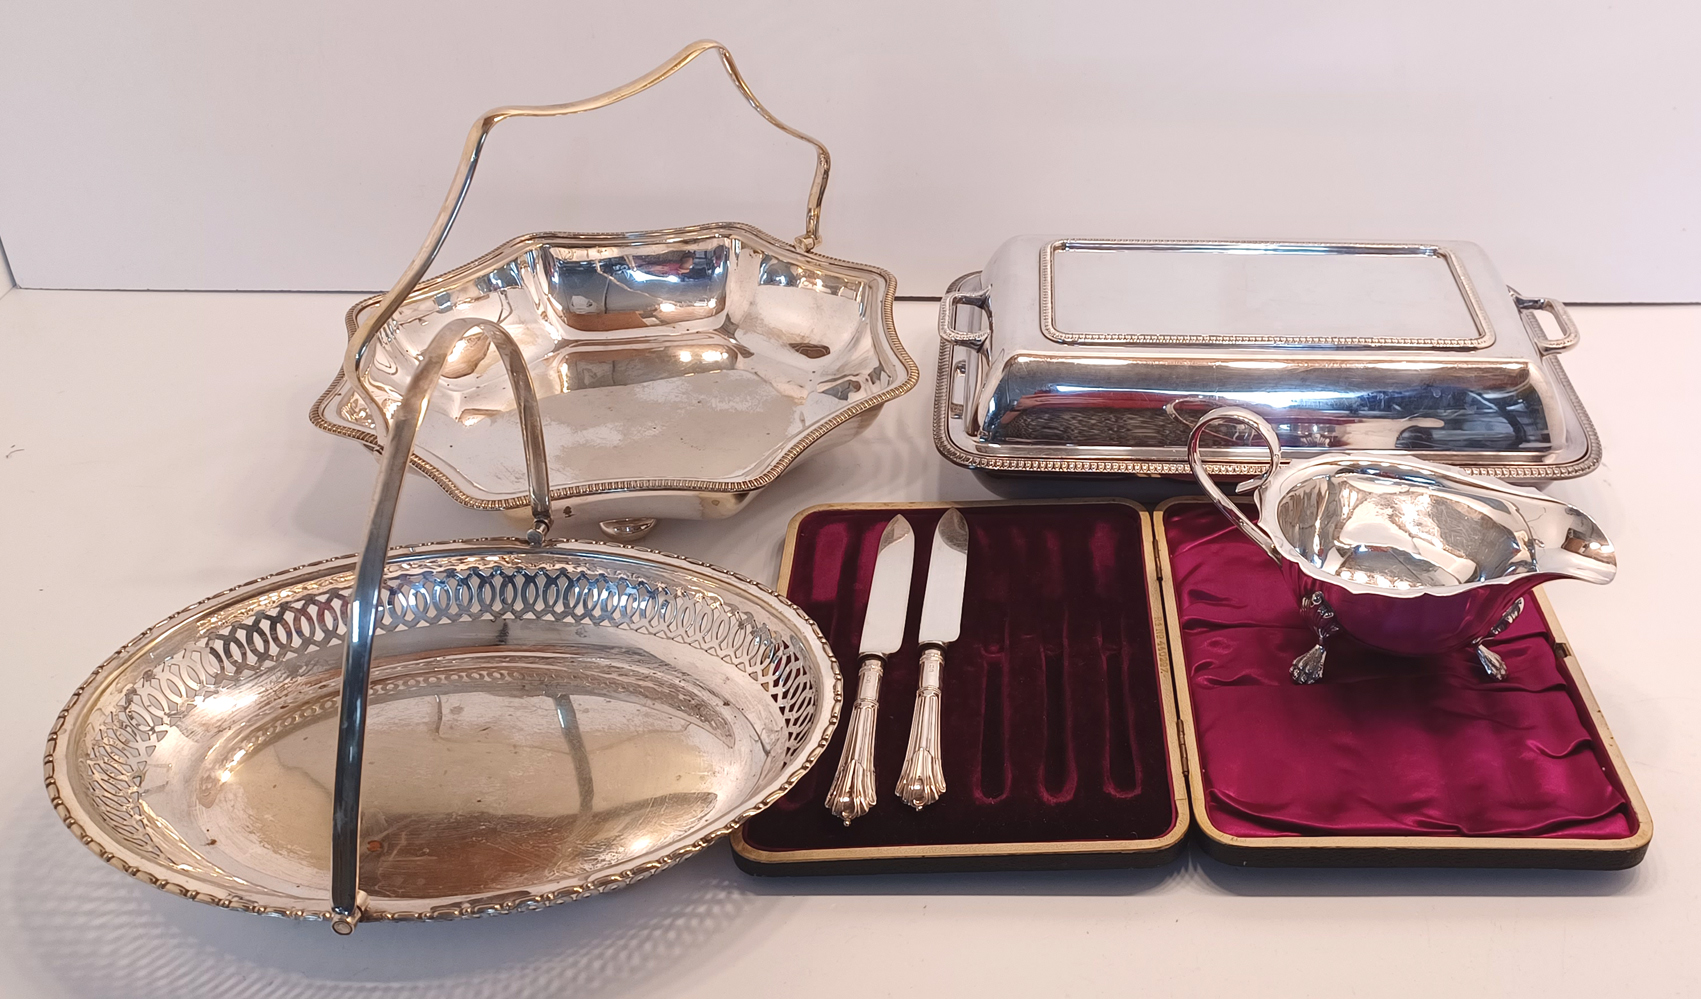 2 SILVER HANDLE TEA KNIVES CASED, SILVER PLATED MAPPIN AND WEBB TUREEN, SAUCE BOAT, AND 2  BASKETS